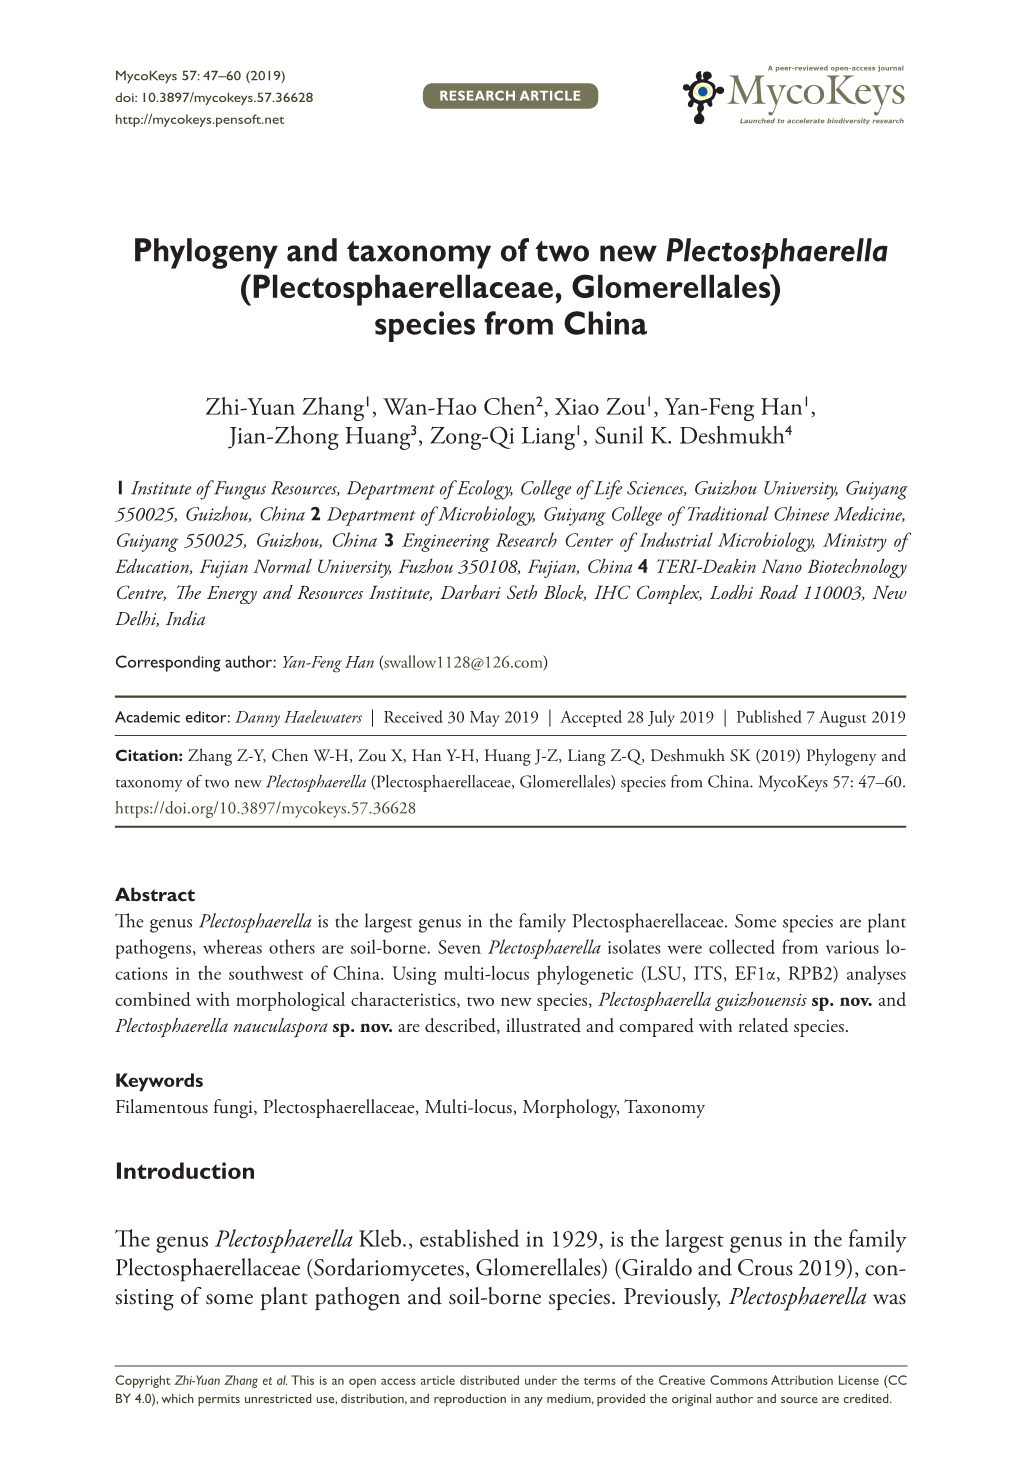 Phylogeny and Taxonomy of Two New Plectosphaerella